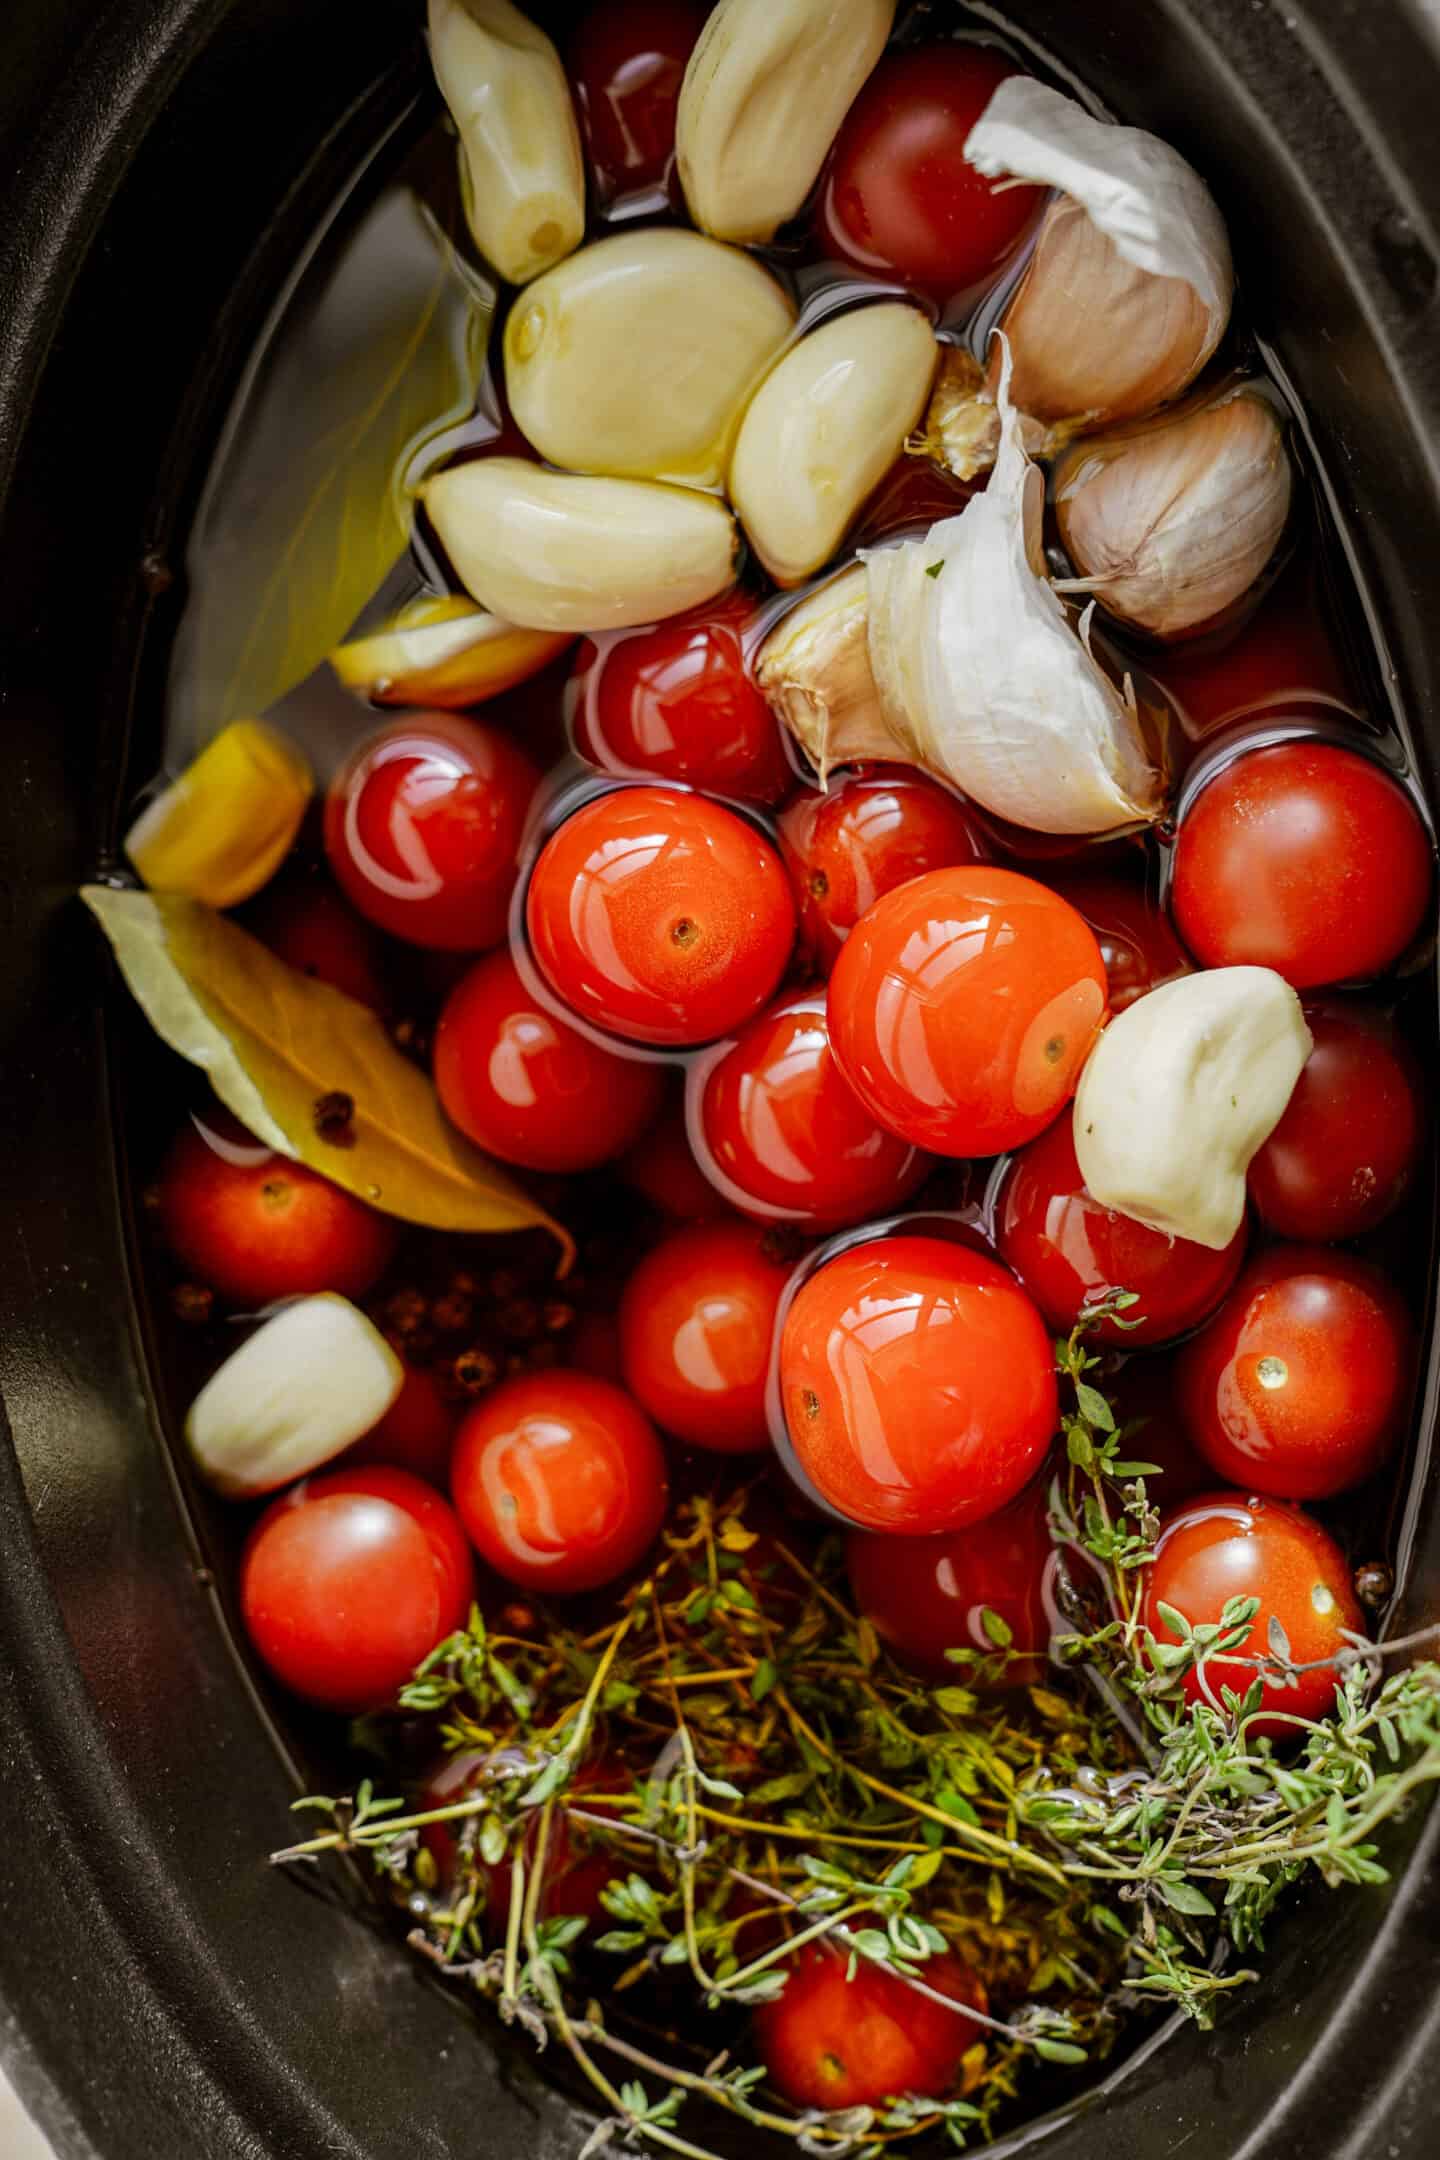 Ingredients for tomato confit in a pot